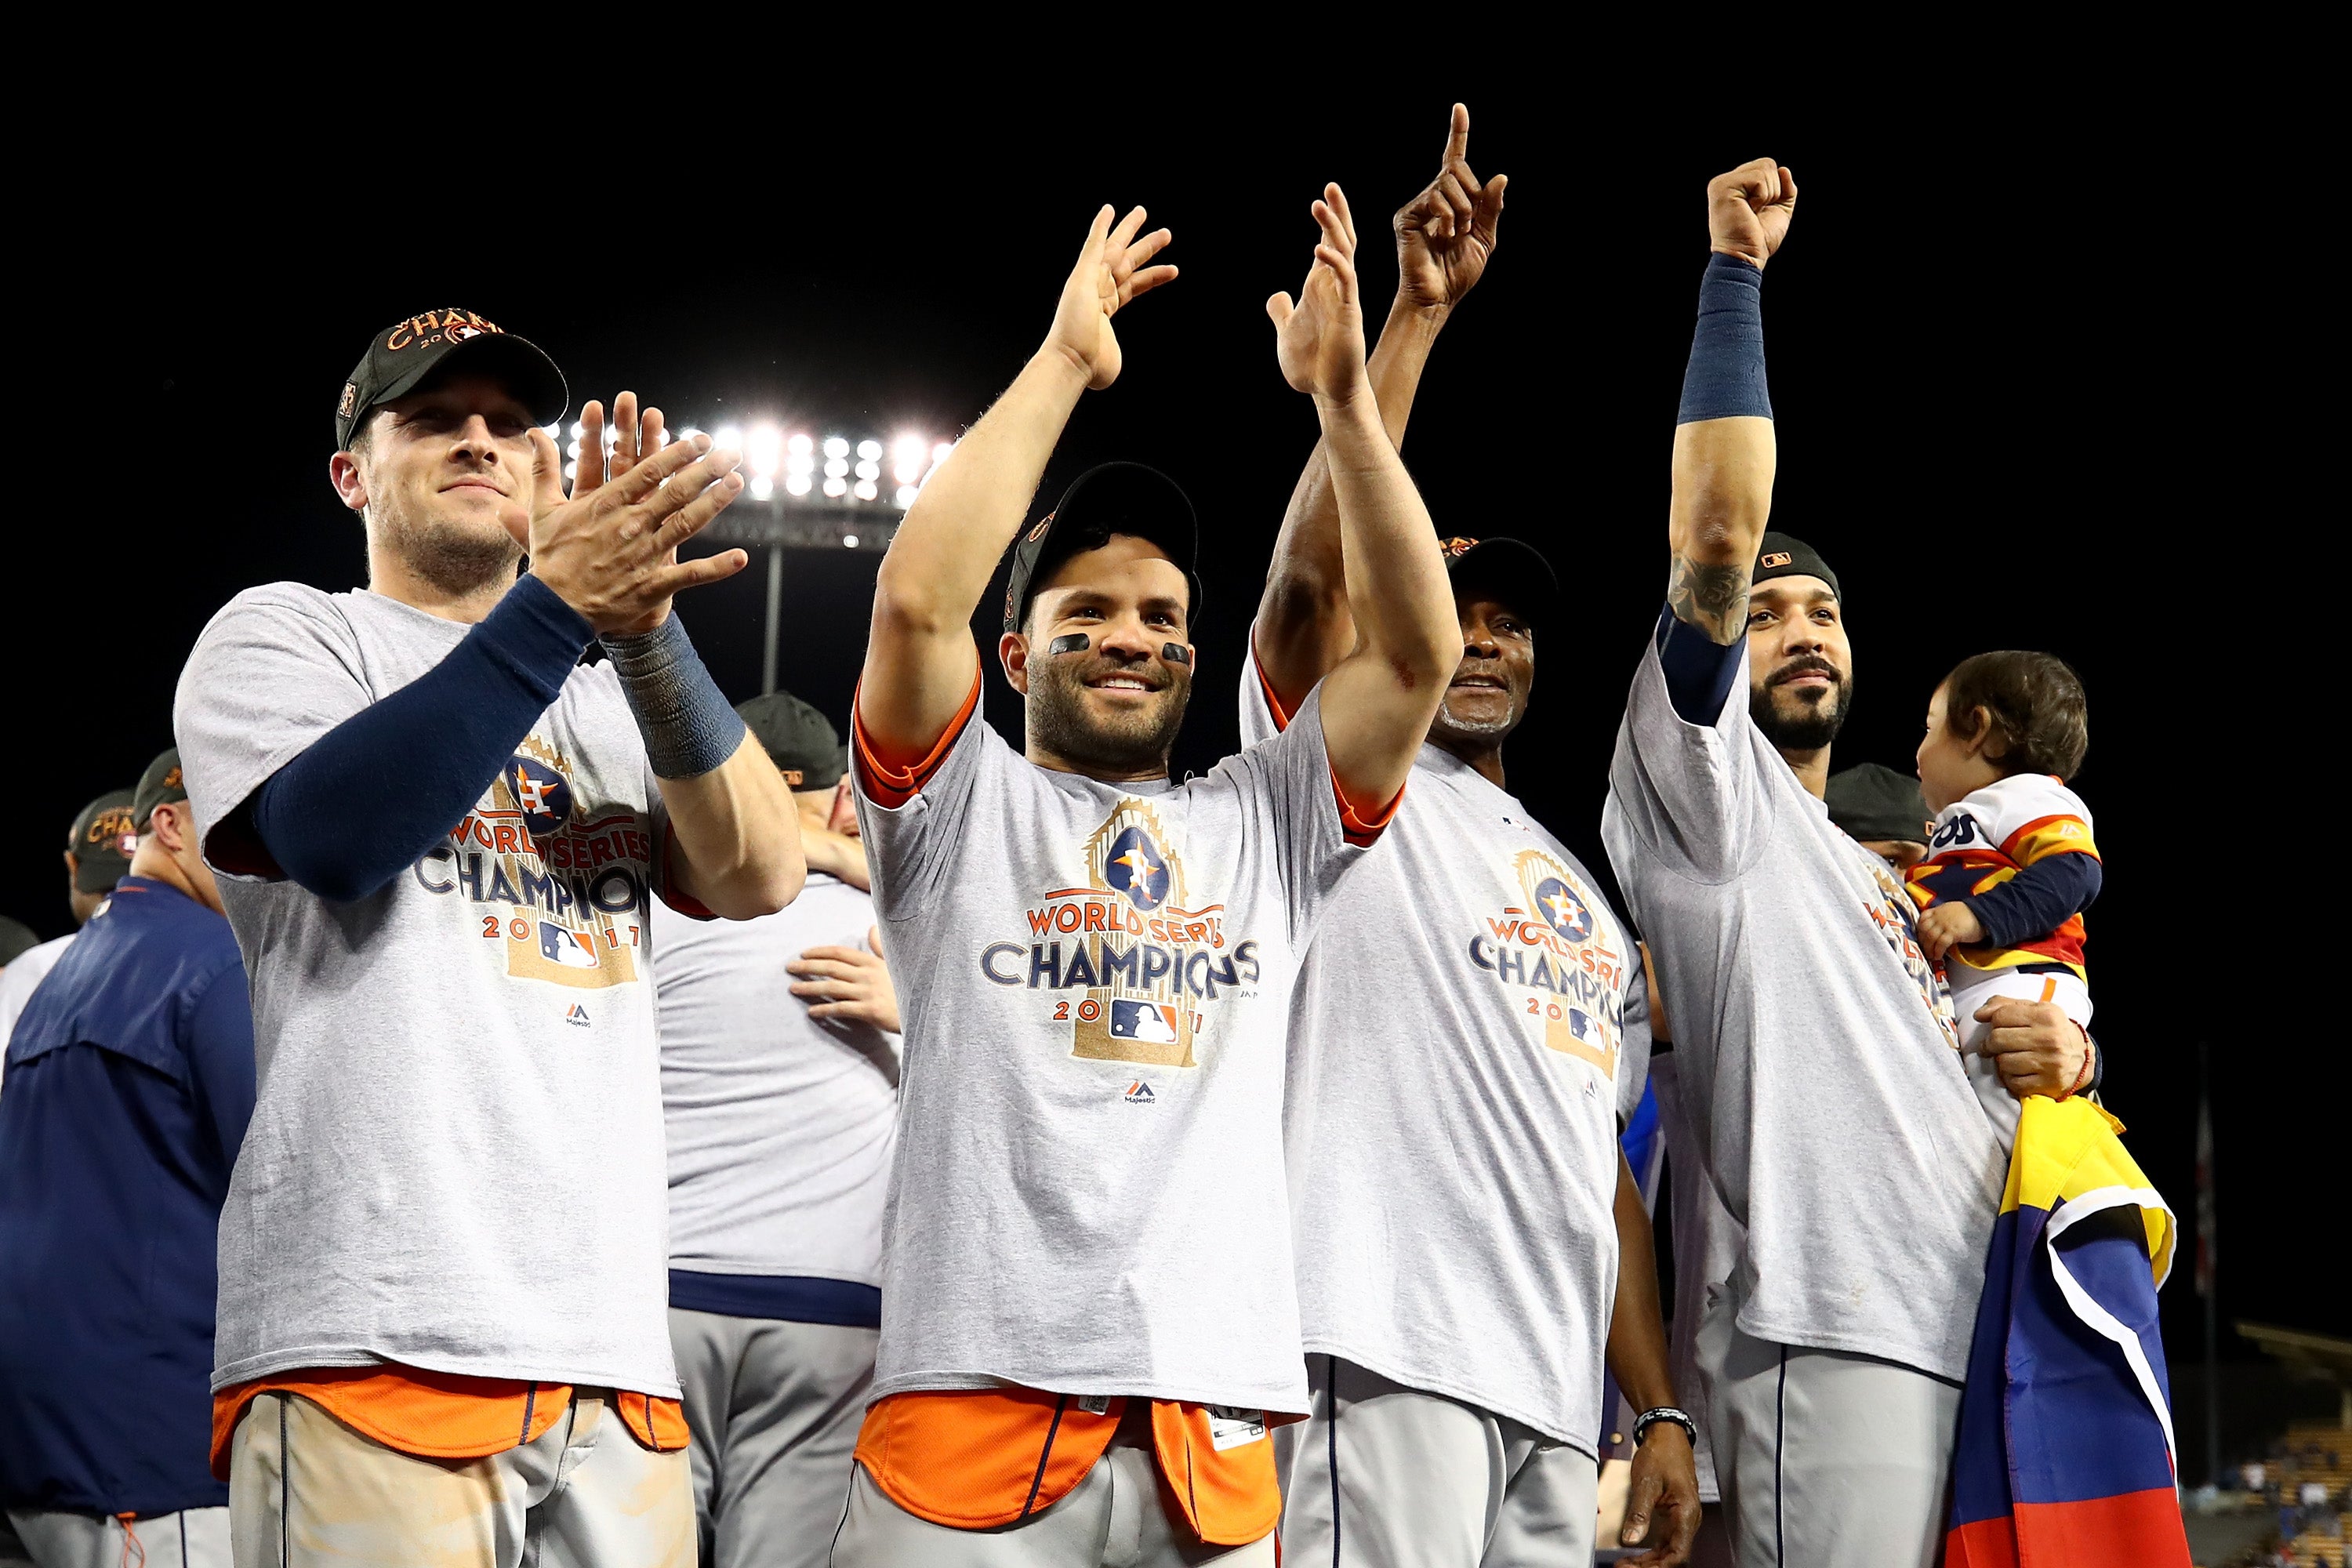 Astros beat Dodgers 5-1 in Game 7 to capture team's first World Series title